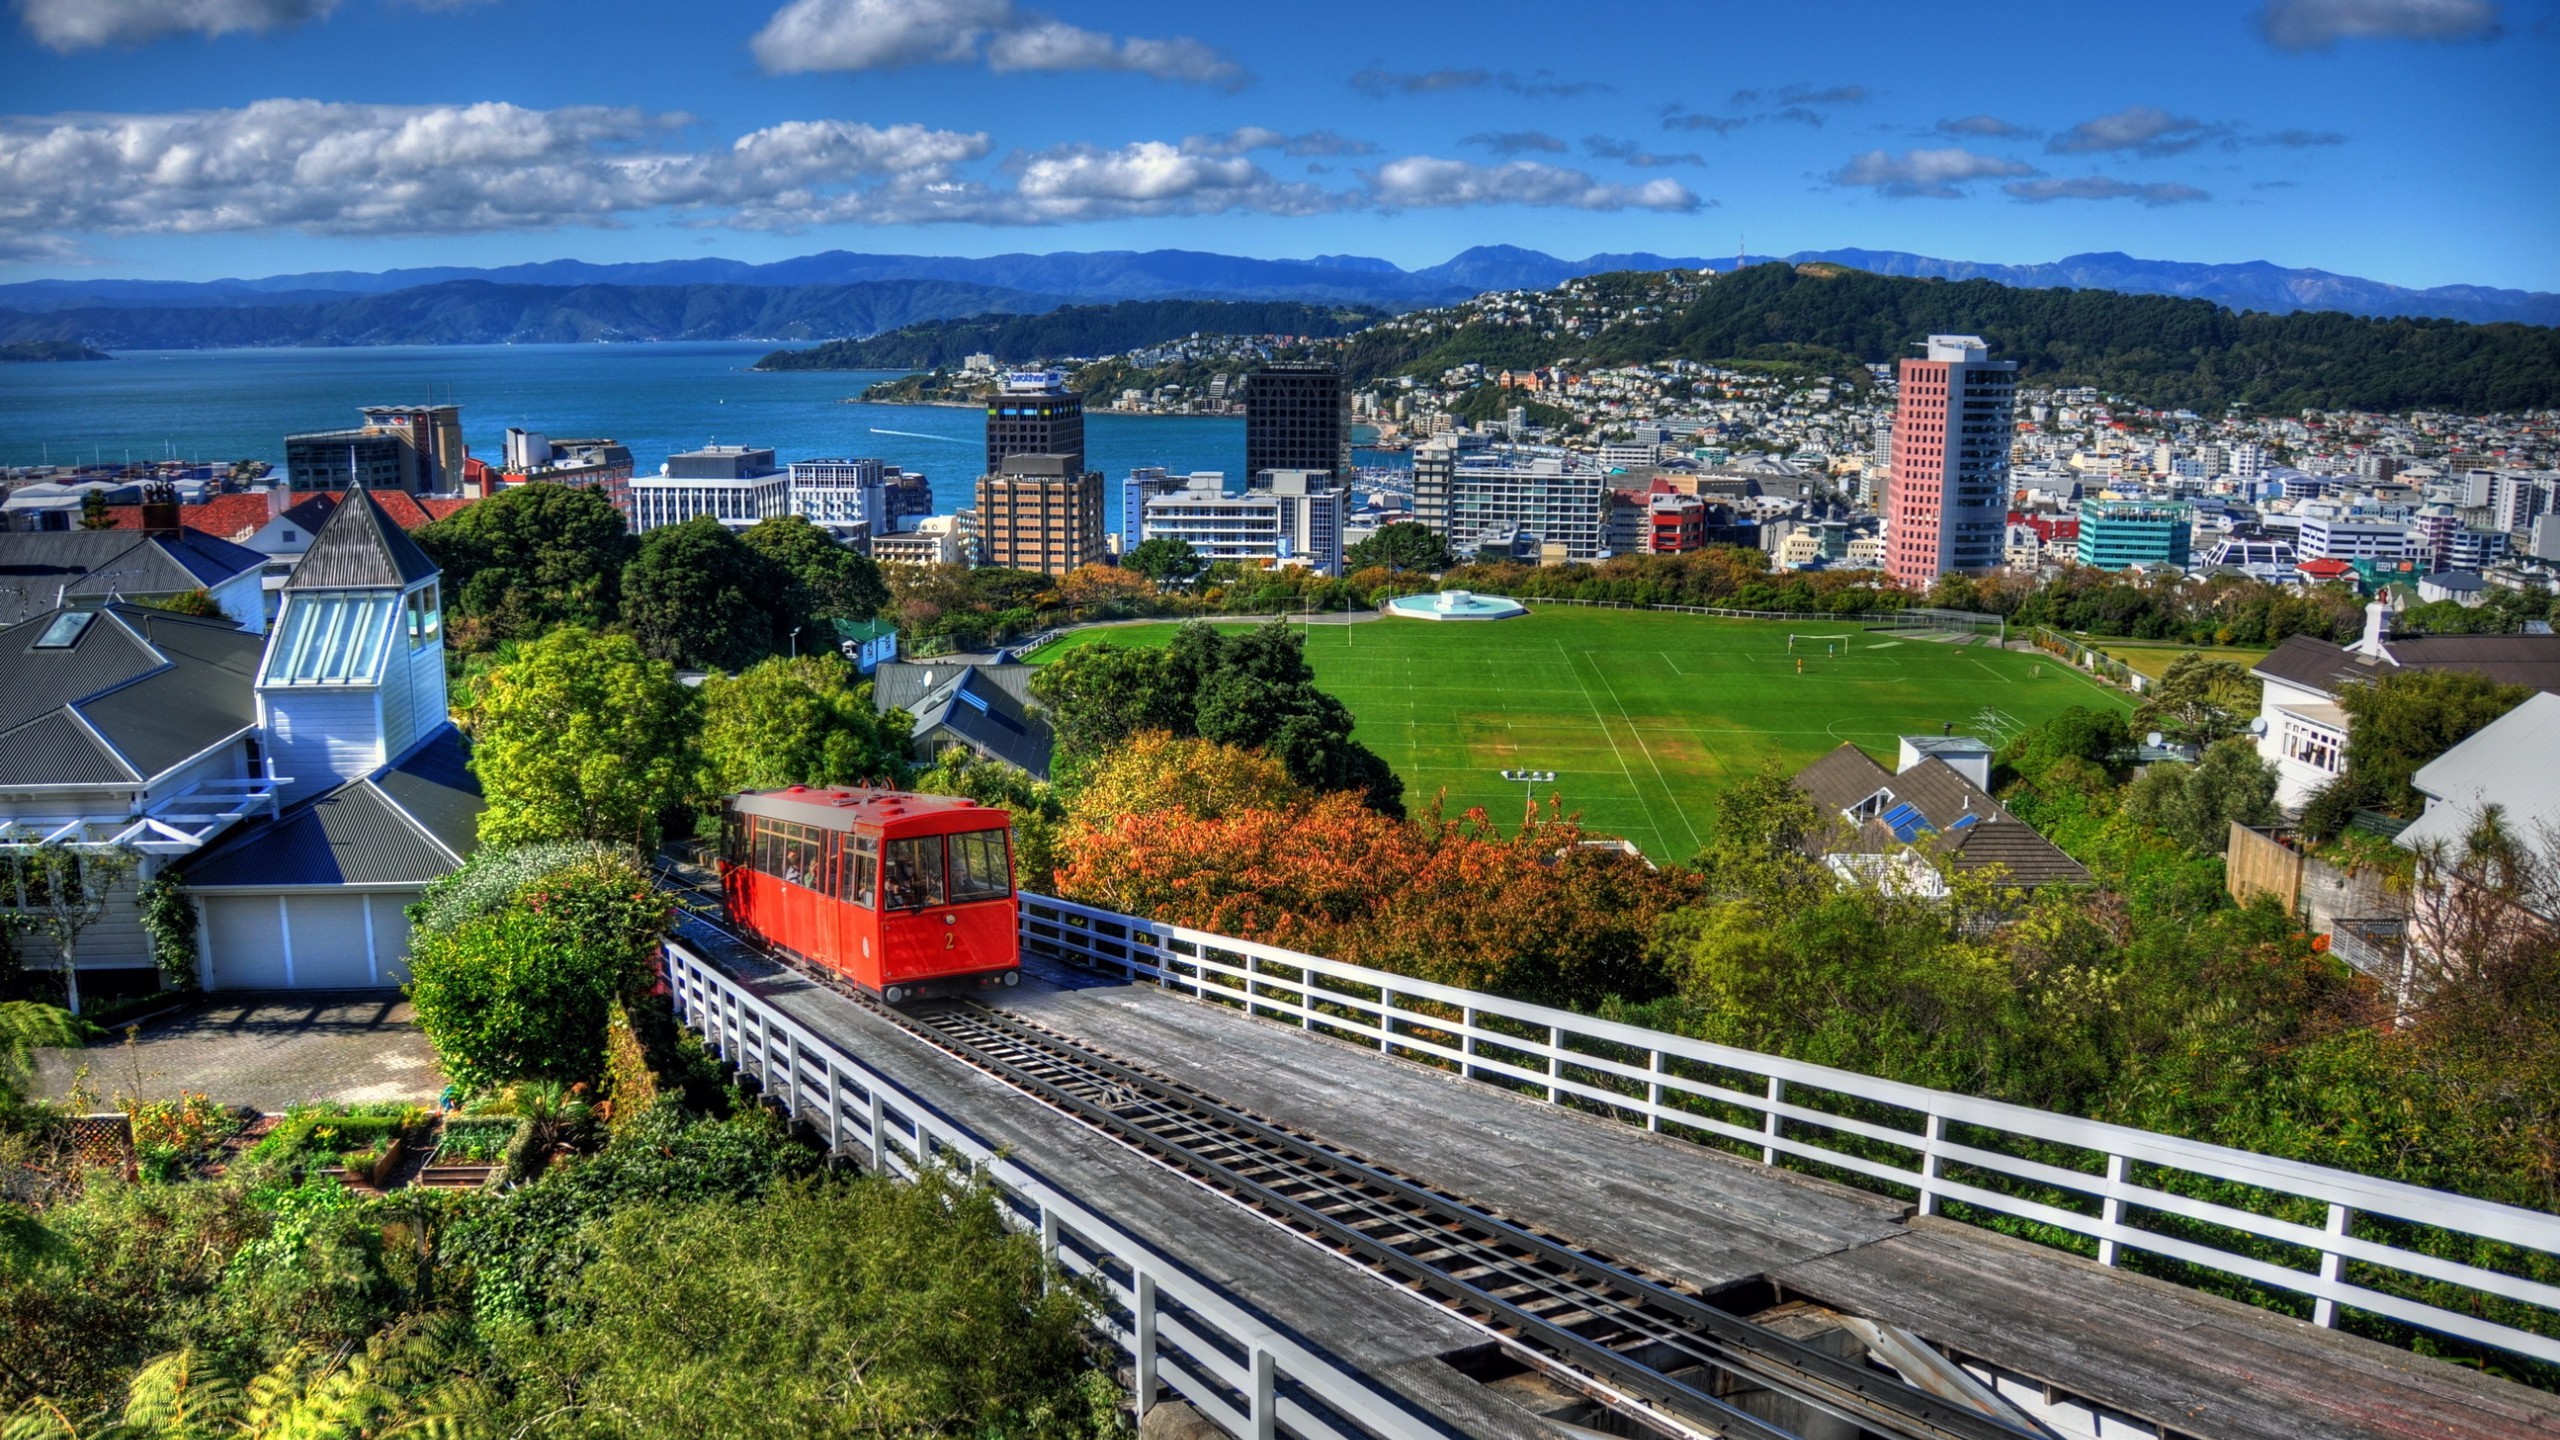 architecture, Building, Wellington, New Zealand, City, Cityscape, Train, Hills, Soccer Field, Clouds, House, Trees, Sea, Railway, Grass Wallpaper